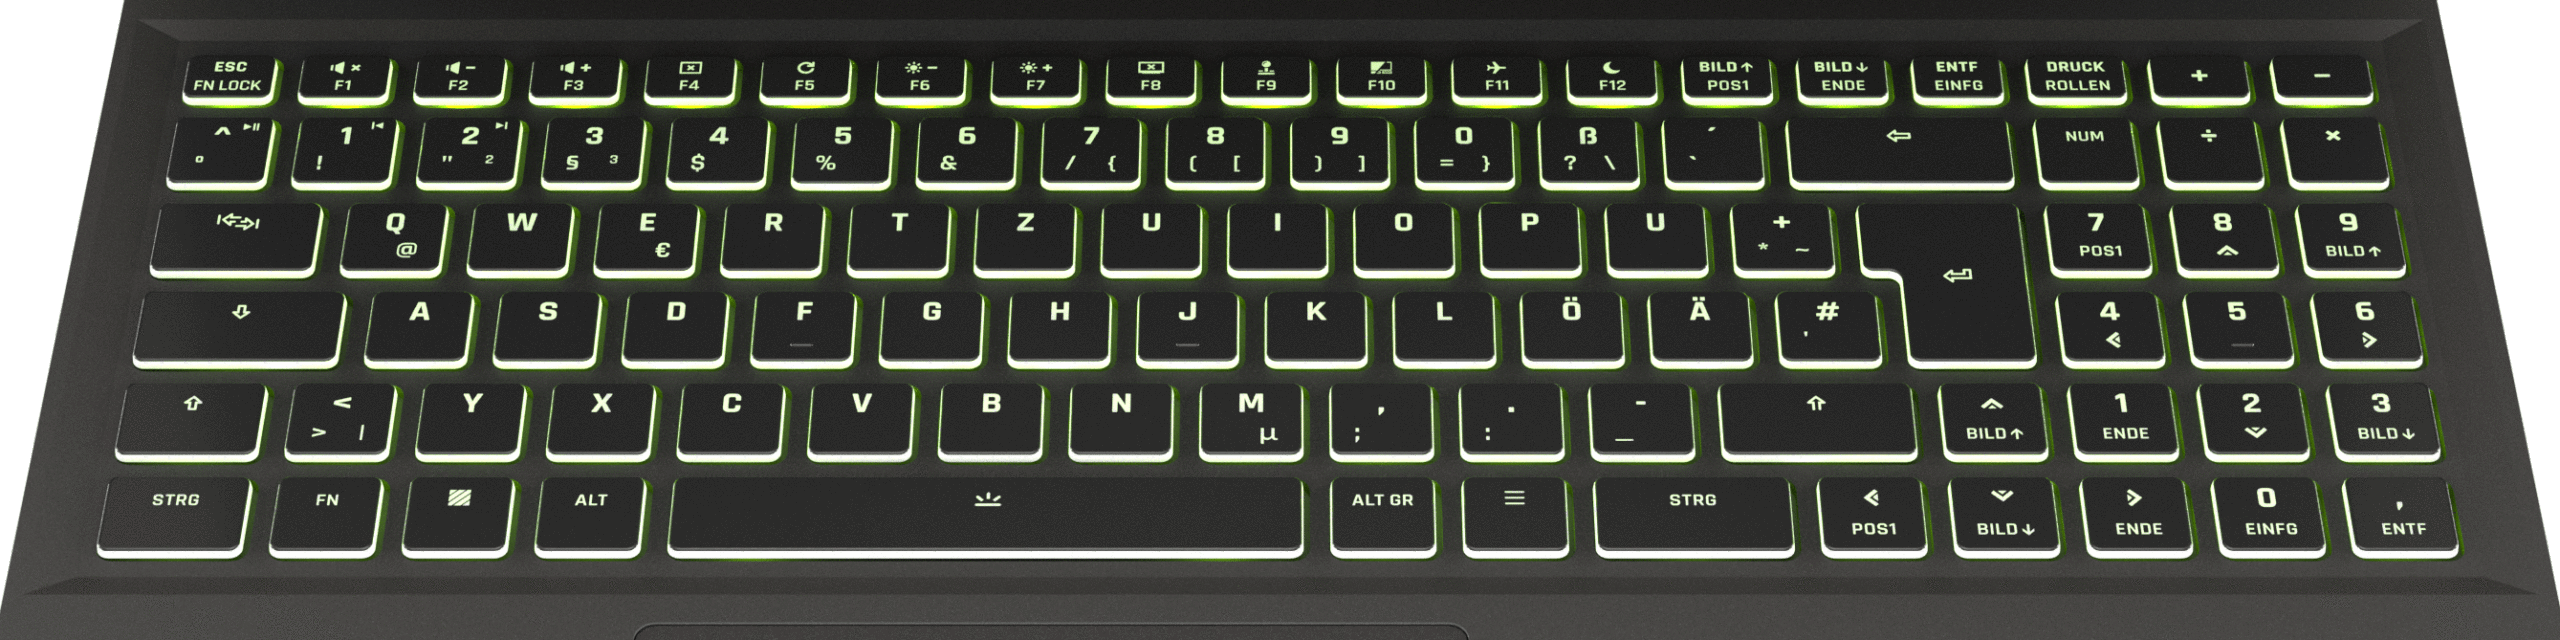 Keyboard layout of the XMG APEX and CORE series